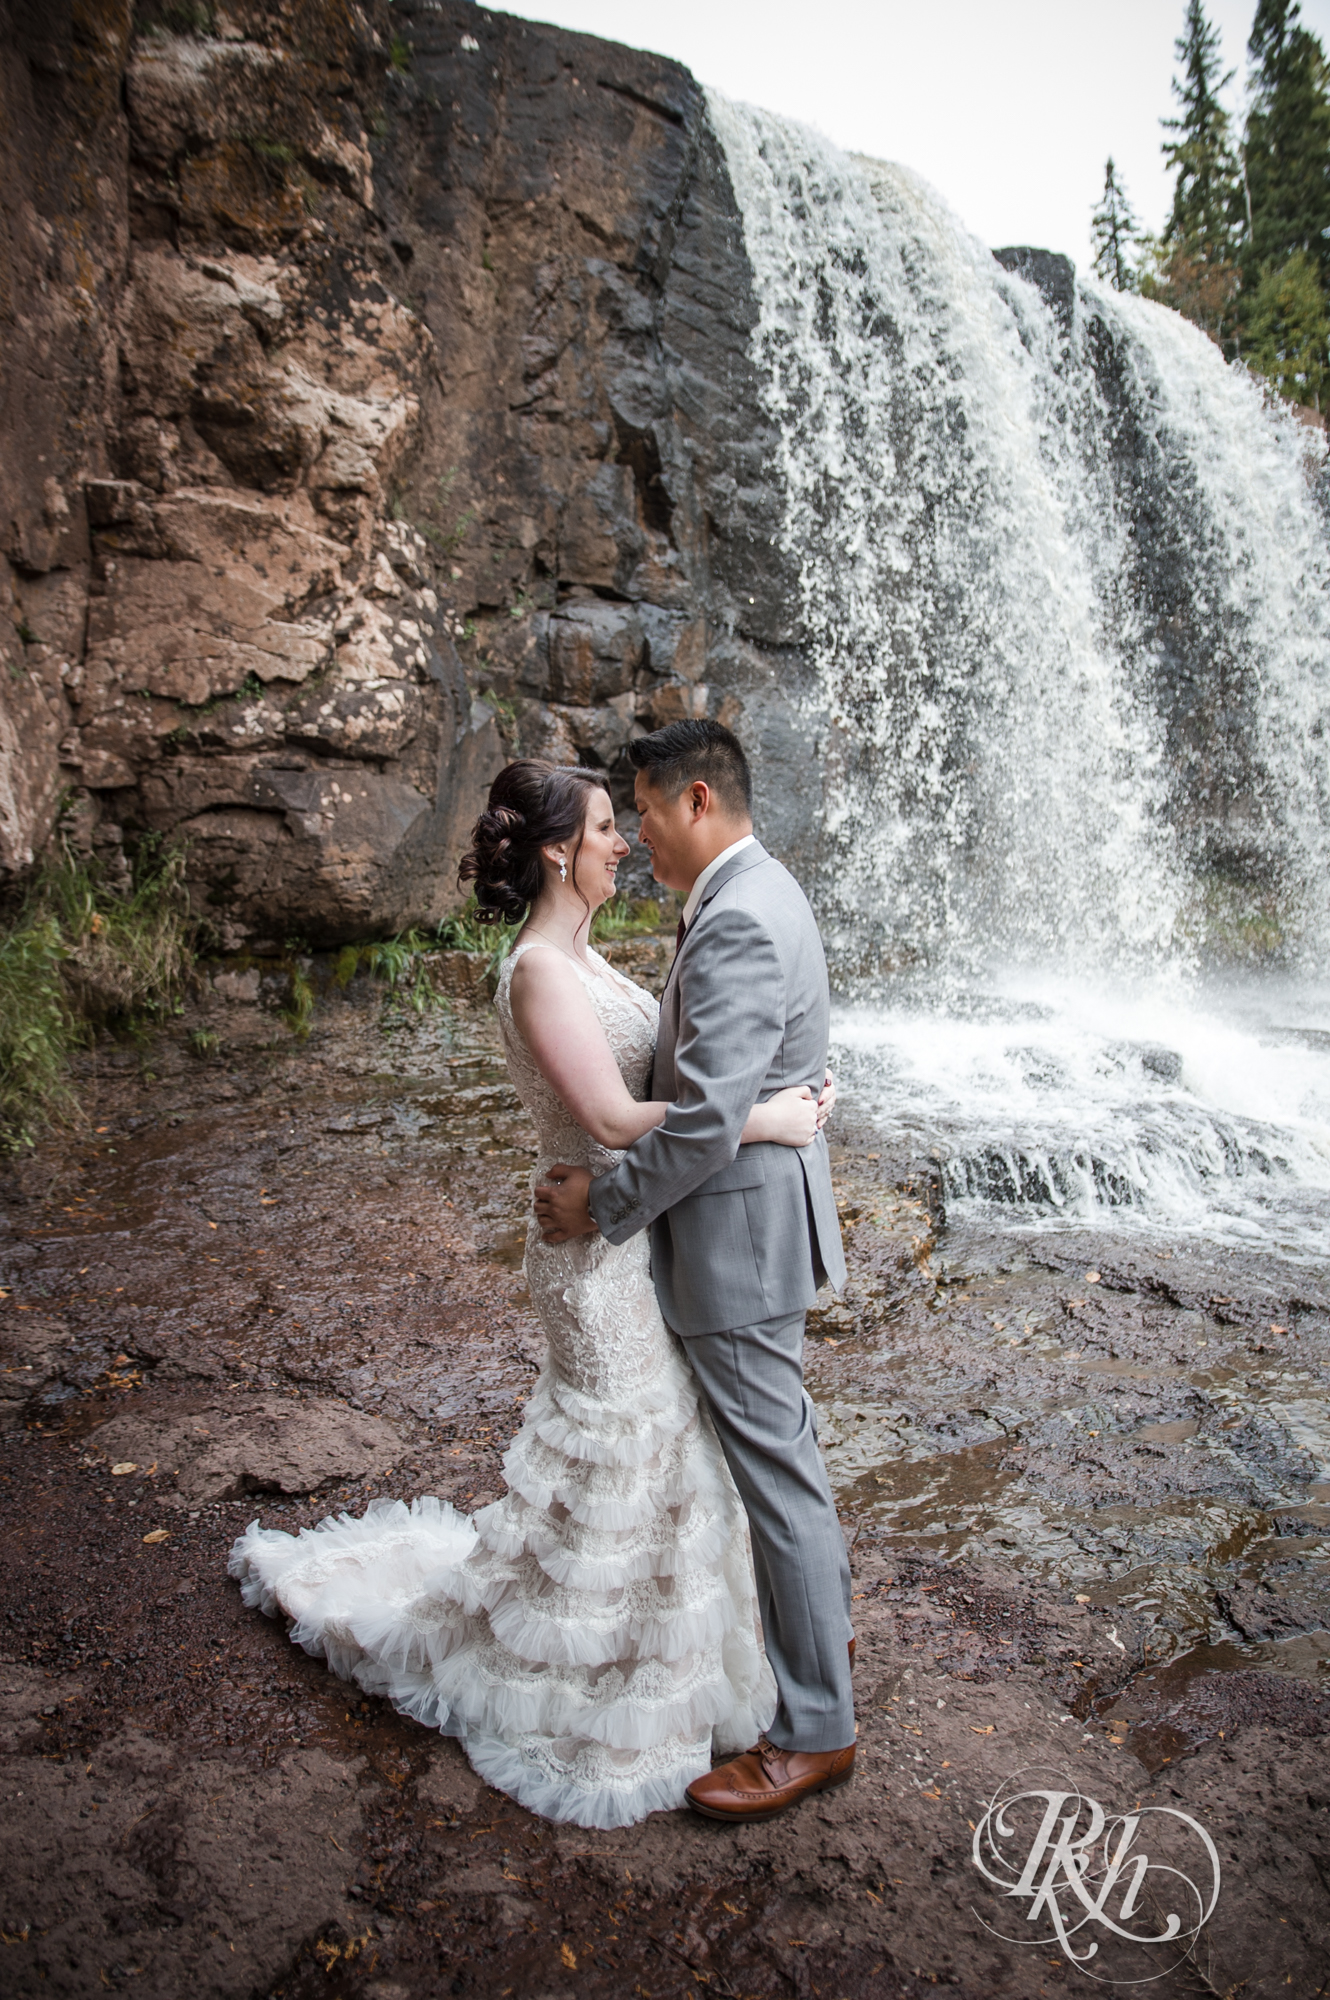 Bride and groom smile in front of waterfall at Gooseberry Falls in Two Harbors, Minnesota.